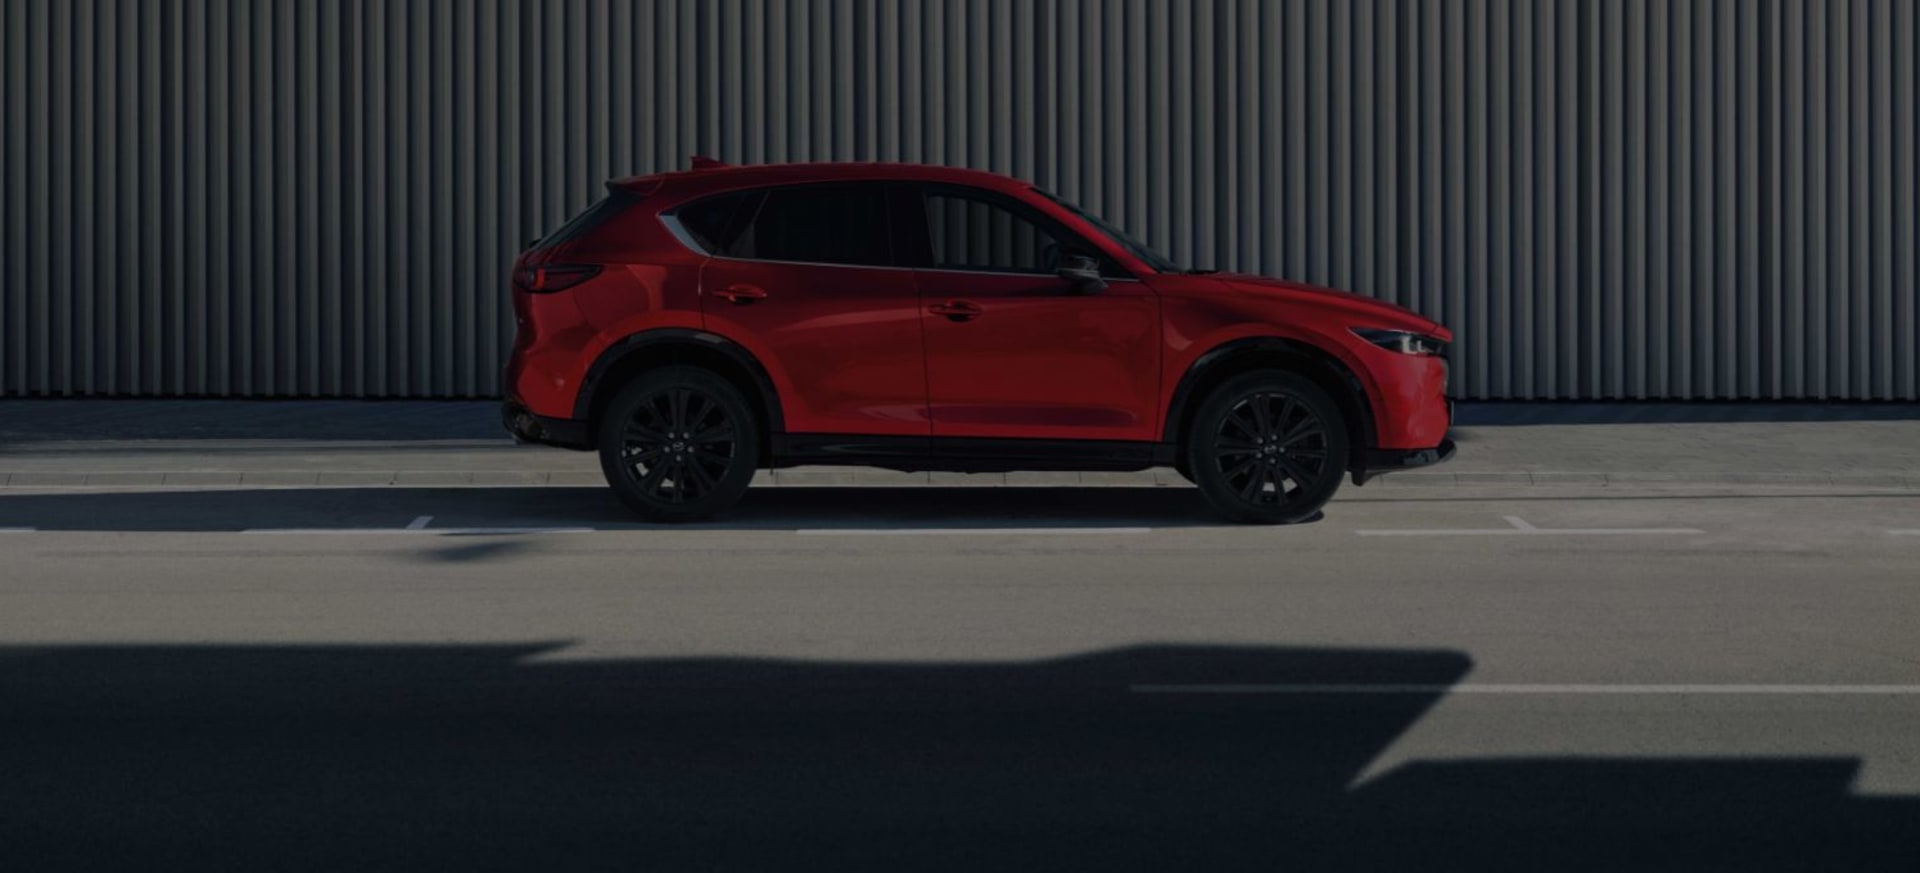 EXCLUSIVE MAZDA CX-5 OFFER!